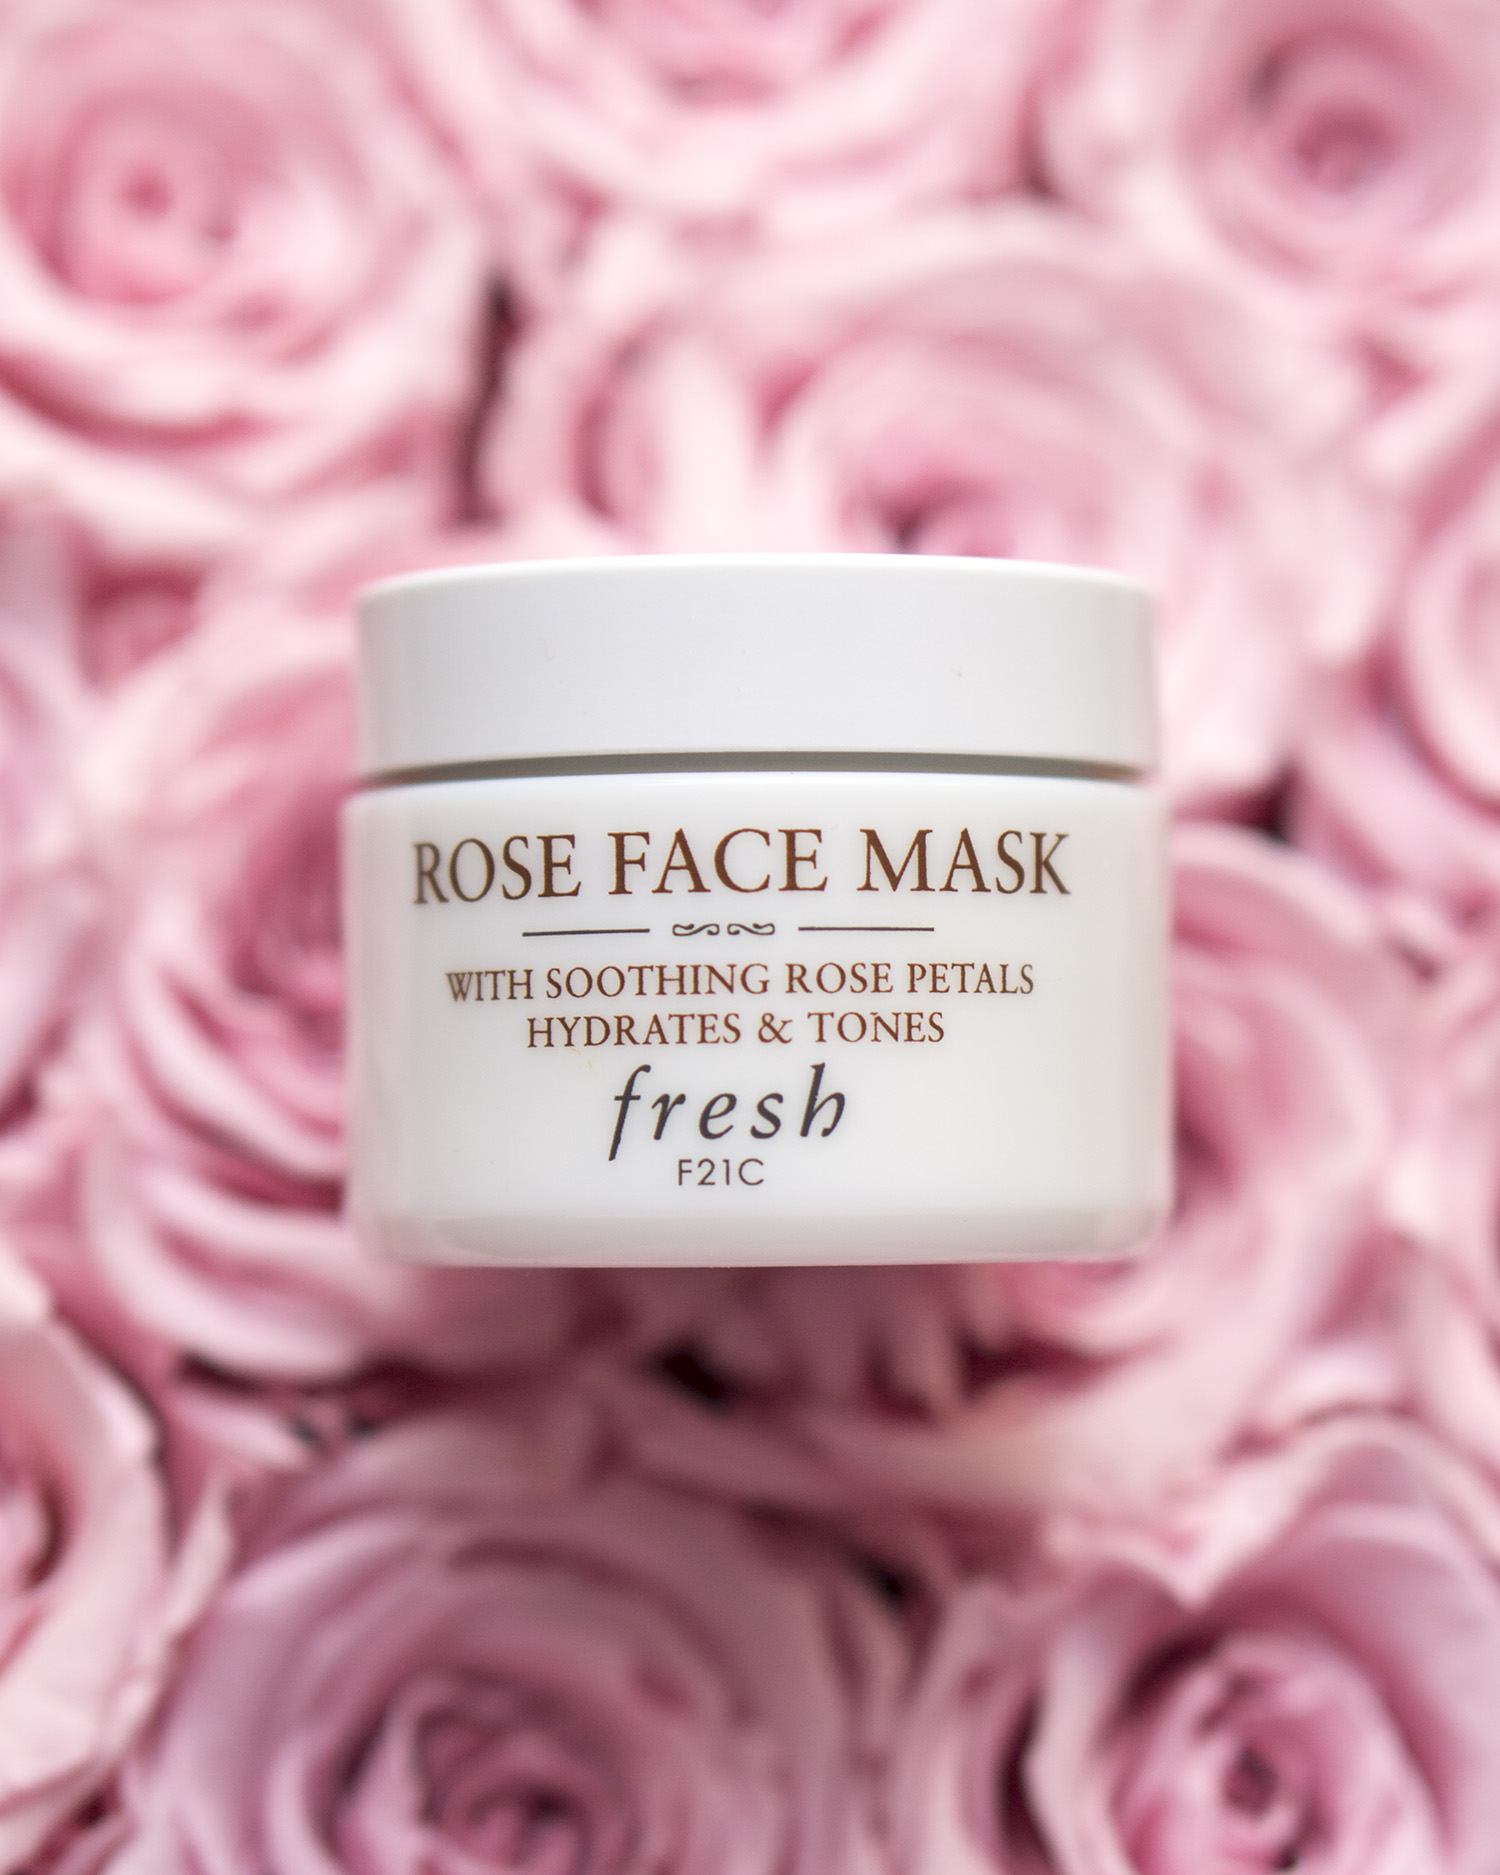 Fresh Rose Face Mask Review - Style Sprinter